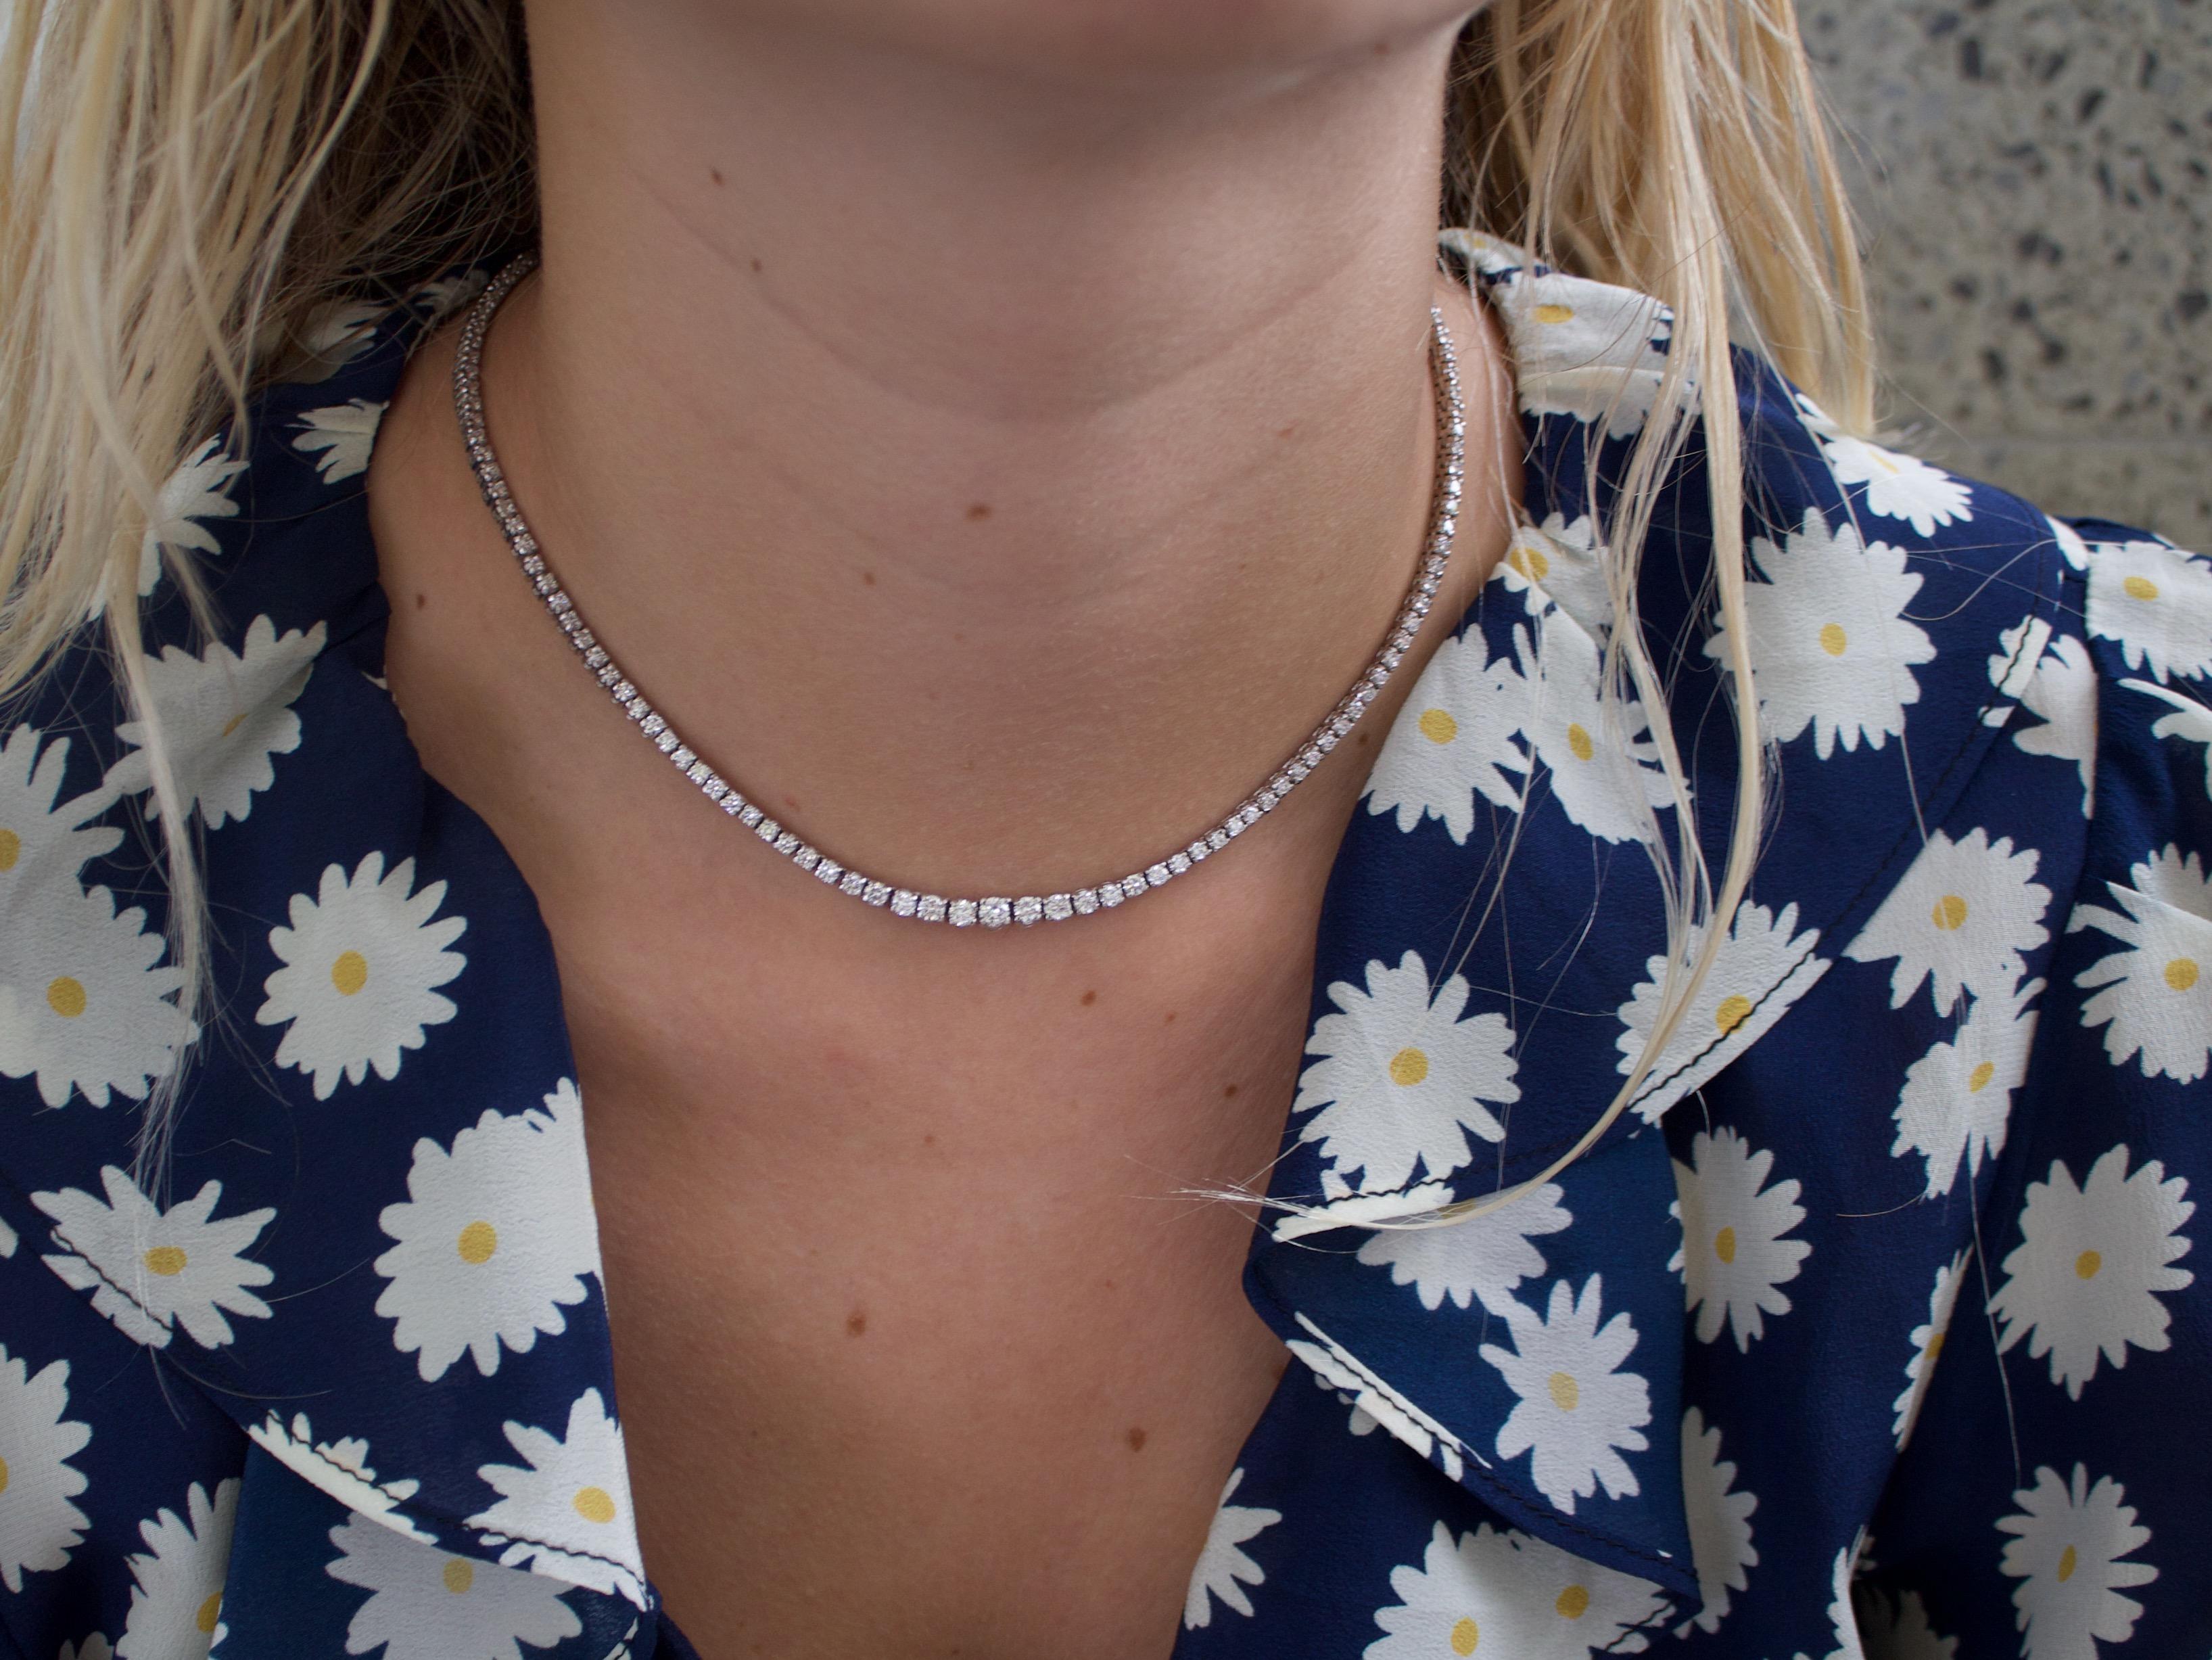 Straight Line Rivie´re Diamond Necklace  6.00 carats in White Gold
One Hundred and Forty Round Brilliant Cut Diamonds weighing 6.00 carats approximately [GH VVS-SI1] Very nice quality.  
